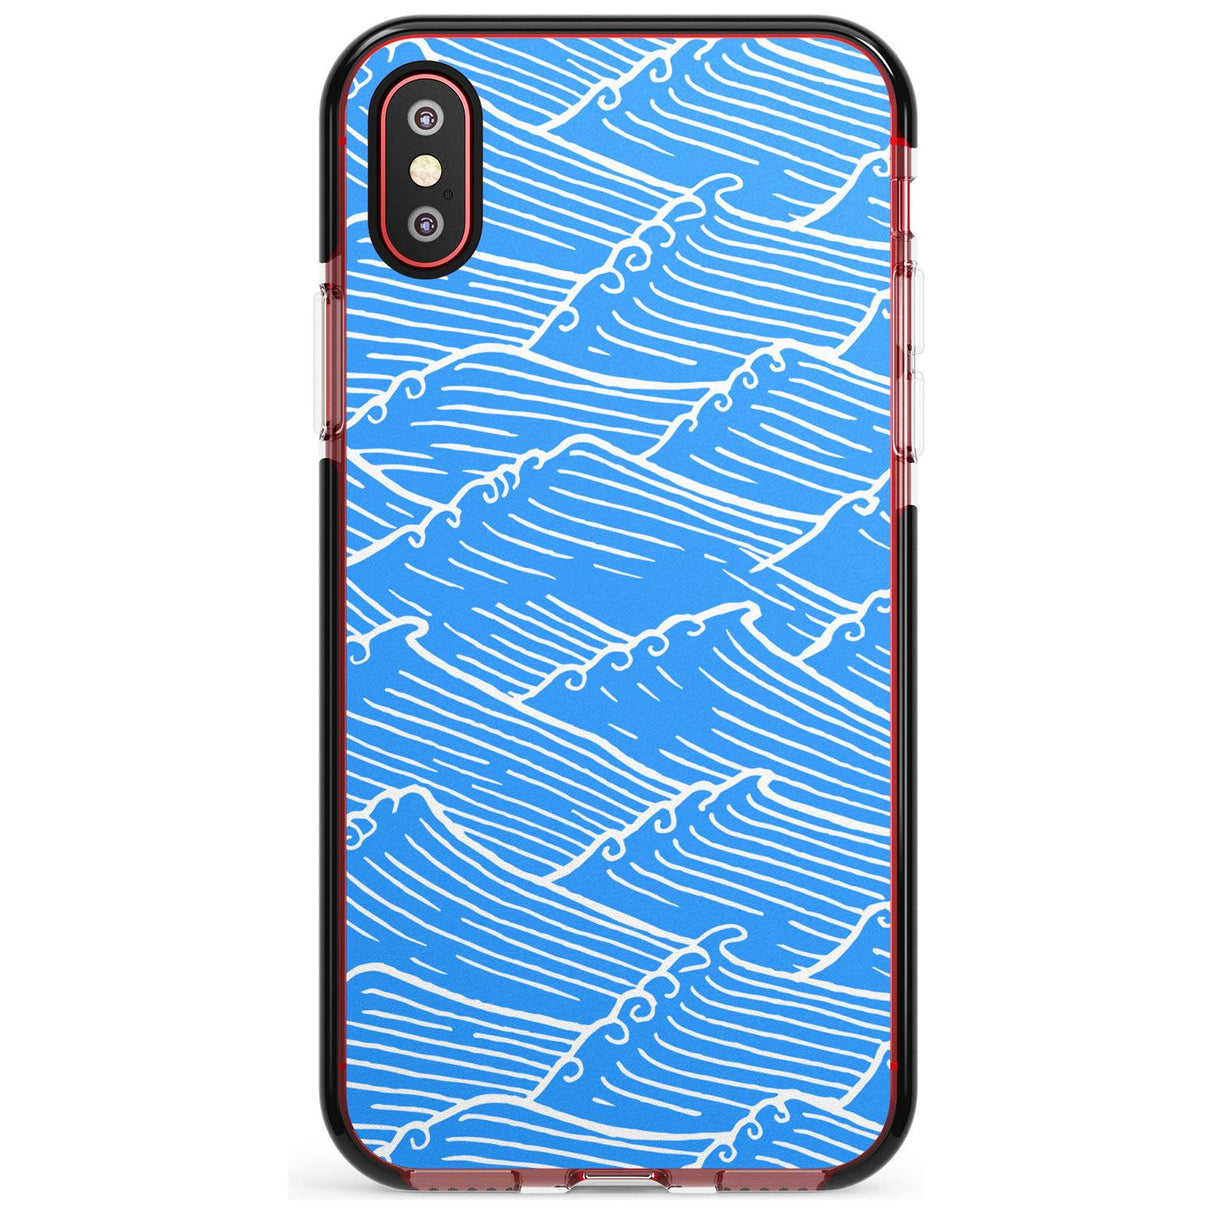 Waves Pattern Black Impact Phone Case for iPhone X XS Max XR